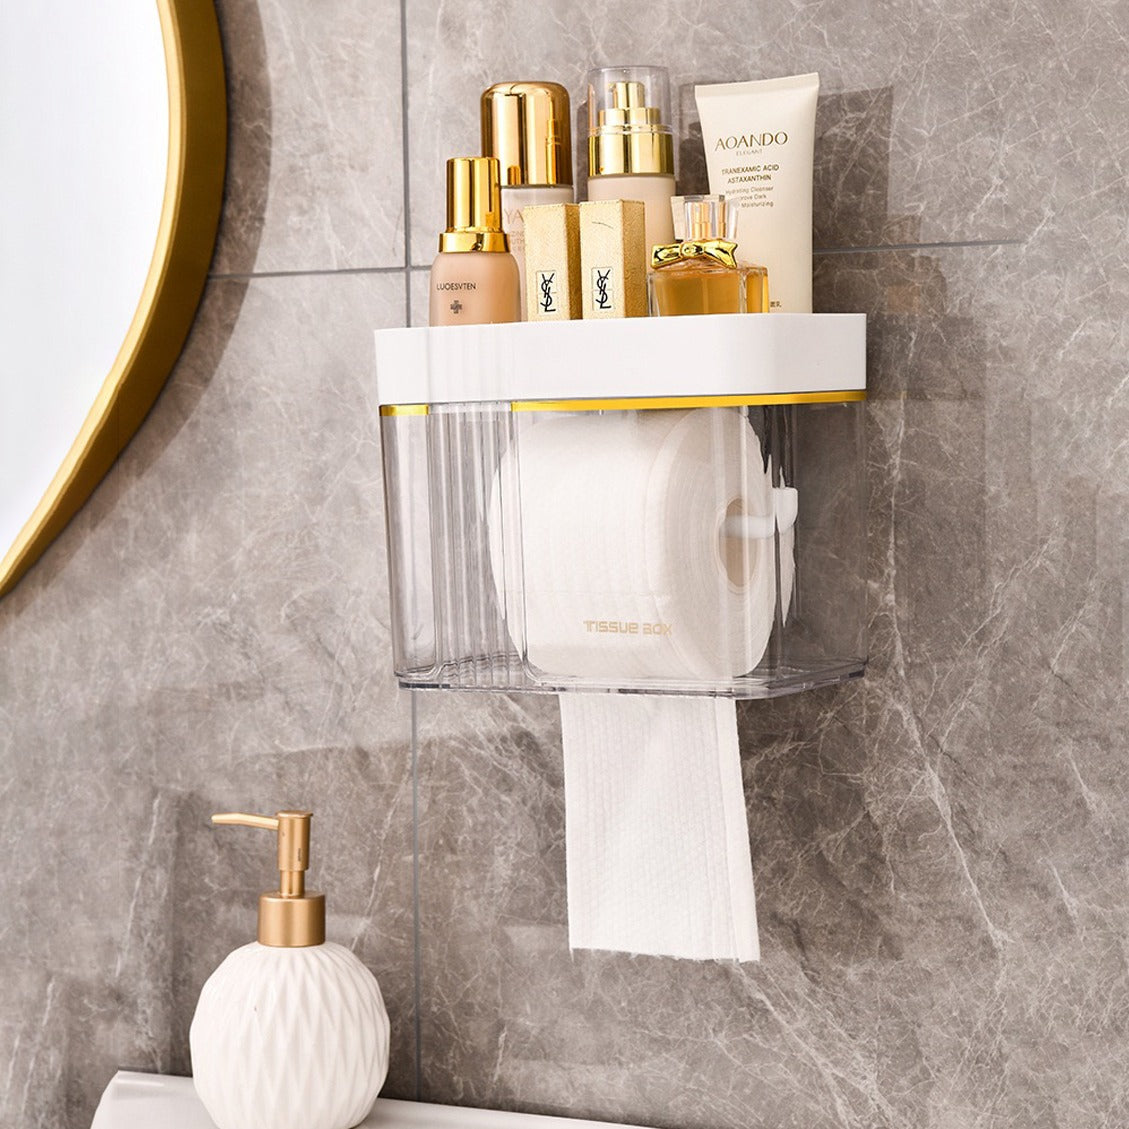 A tissue roll and cosmetic items stored in a Transparent Wall-Mounted Toilet Paper Holder with Storage Shelf next to a handwash liquid 